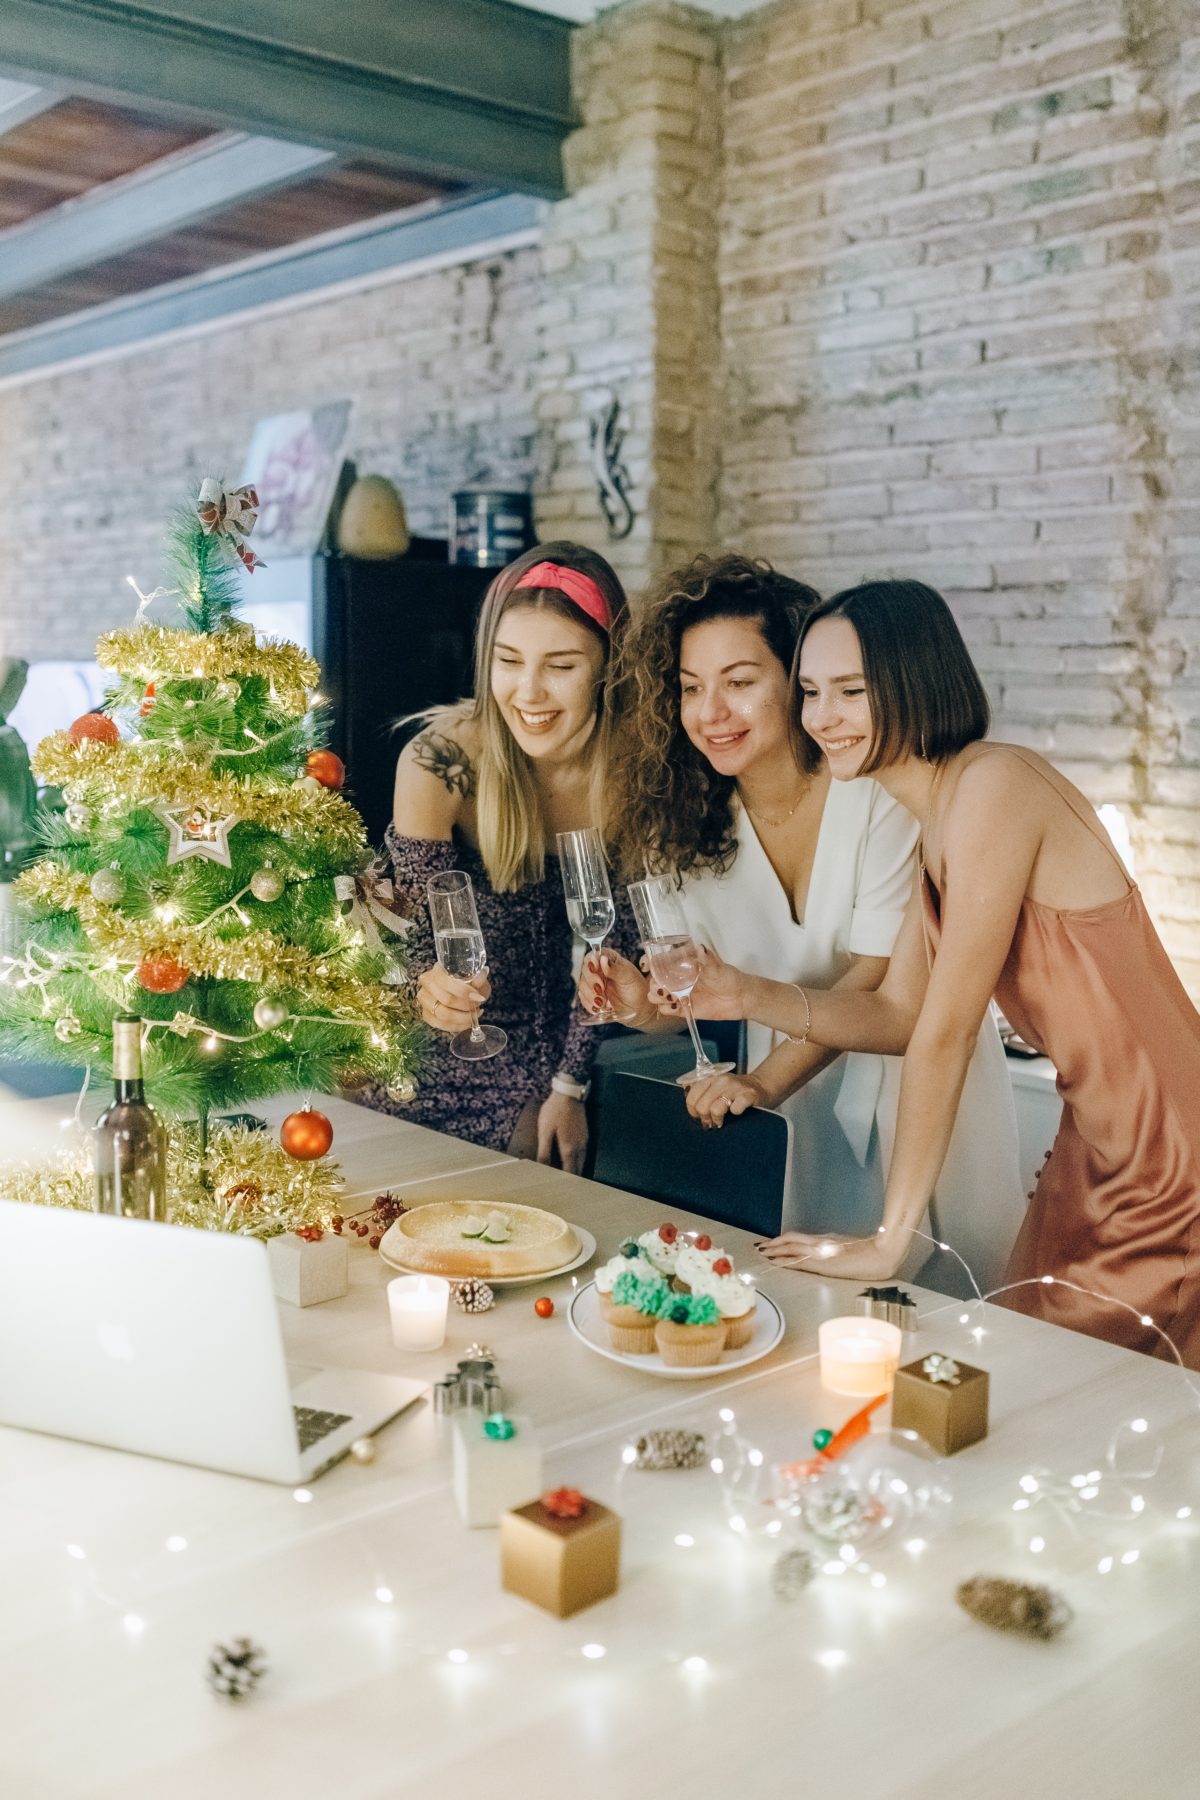 Preparing Your Business For The Holidays